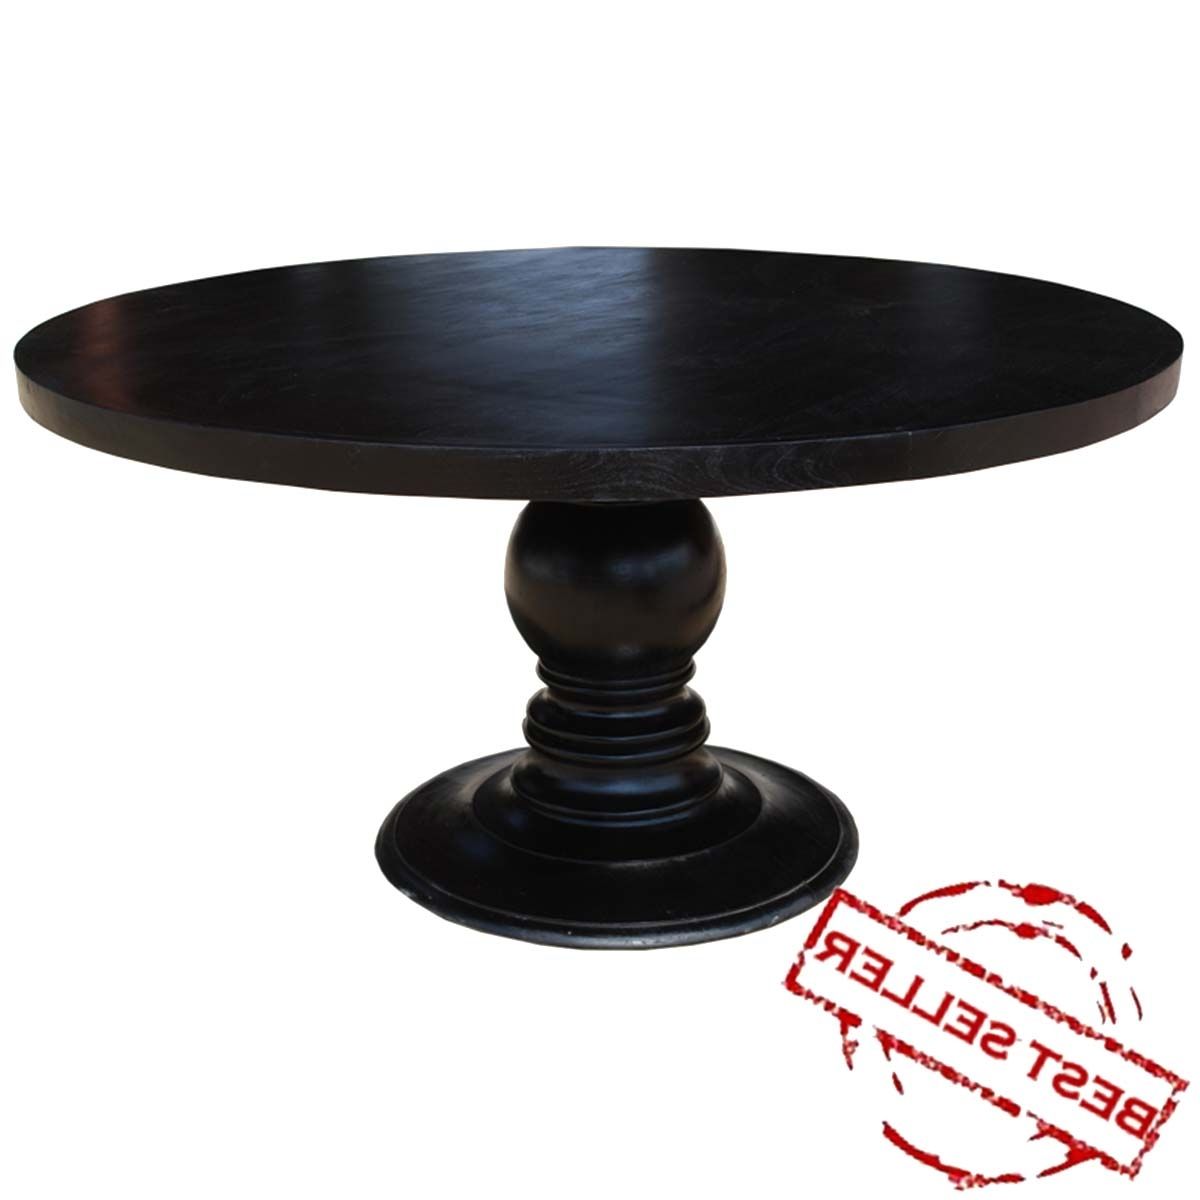 Nottingham Solid Wood 72" Black Round Dining Table For 8 People Regarding Current Dark Round Dining Tables (View 5 of 25)